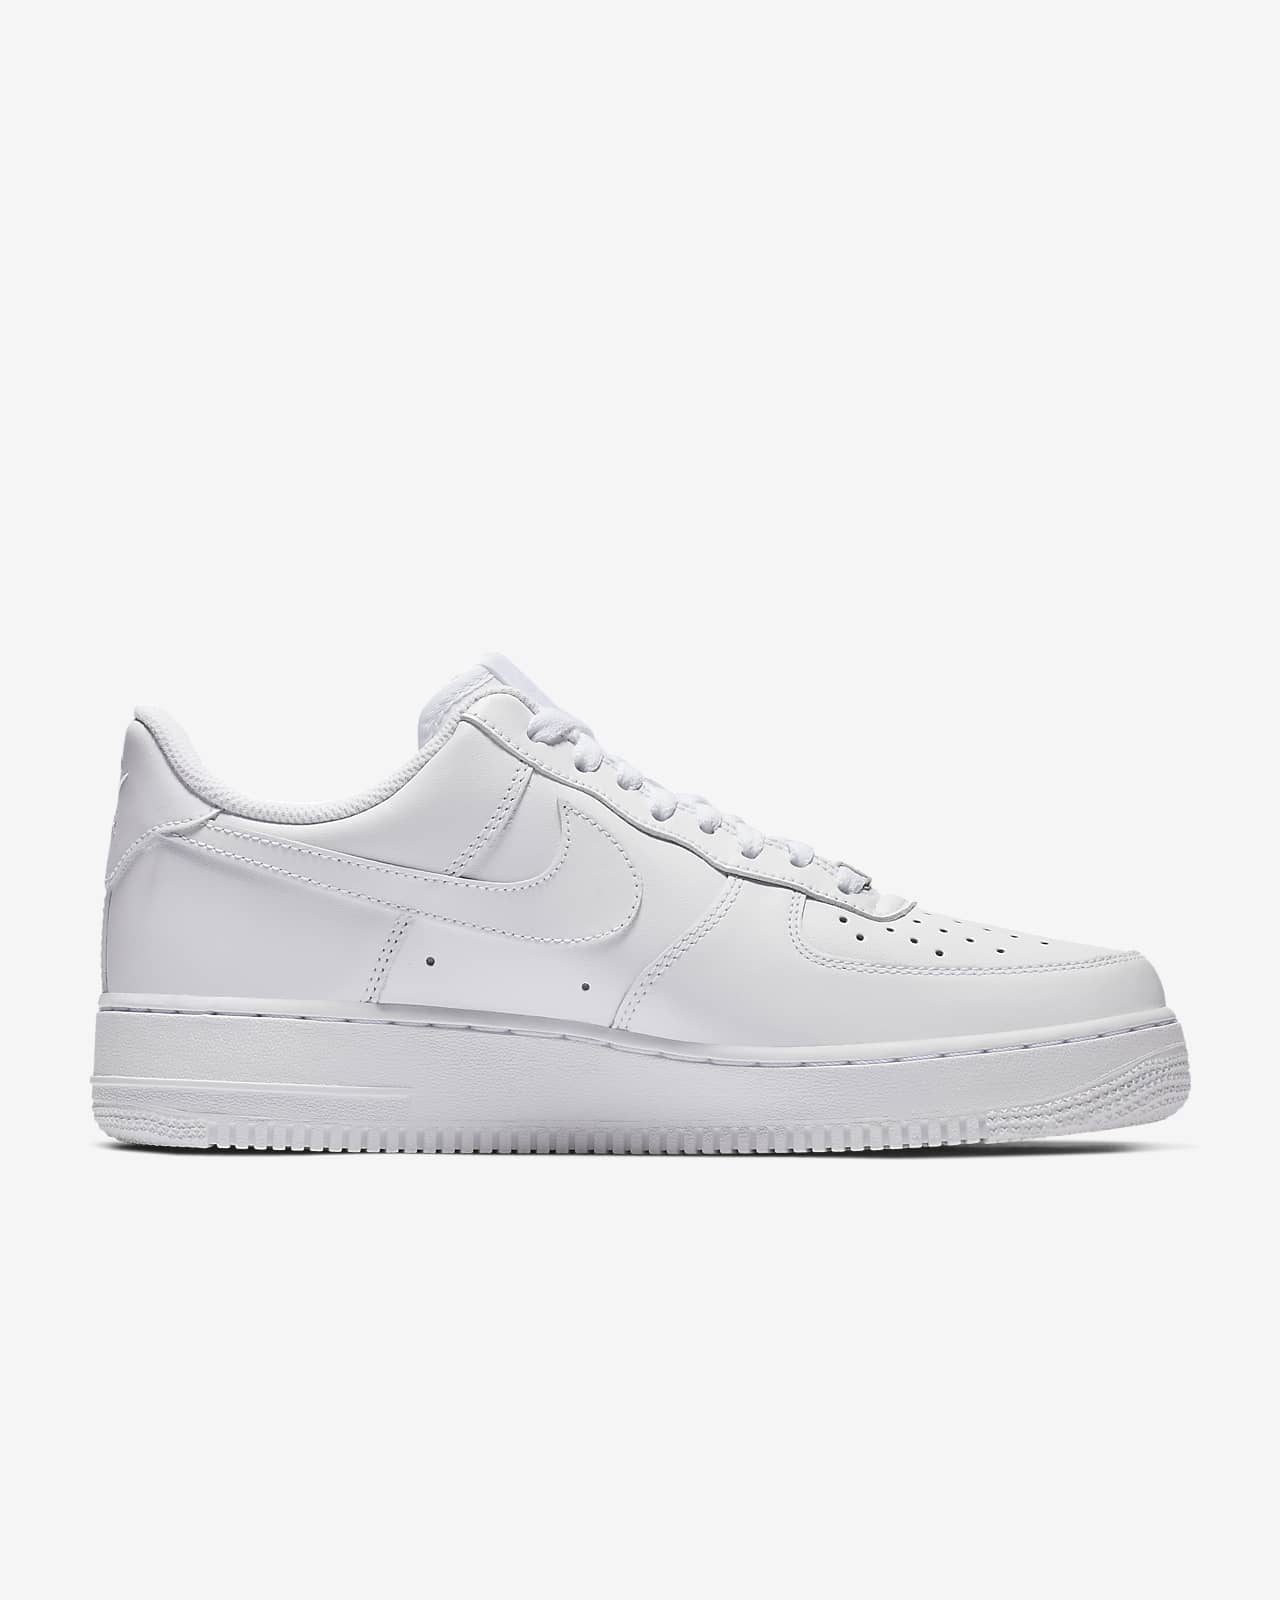 white air force ones womens size 8